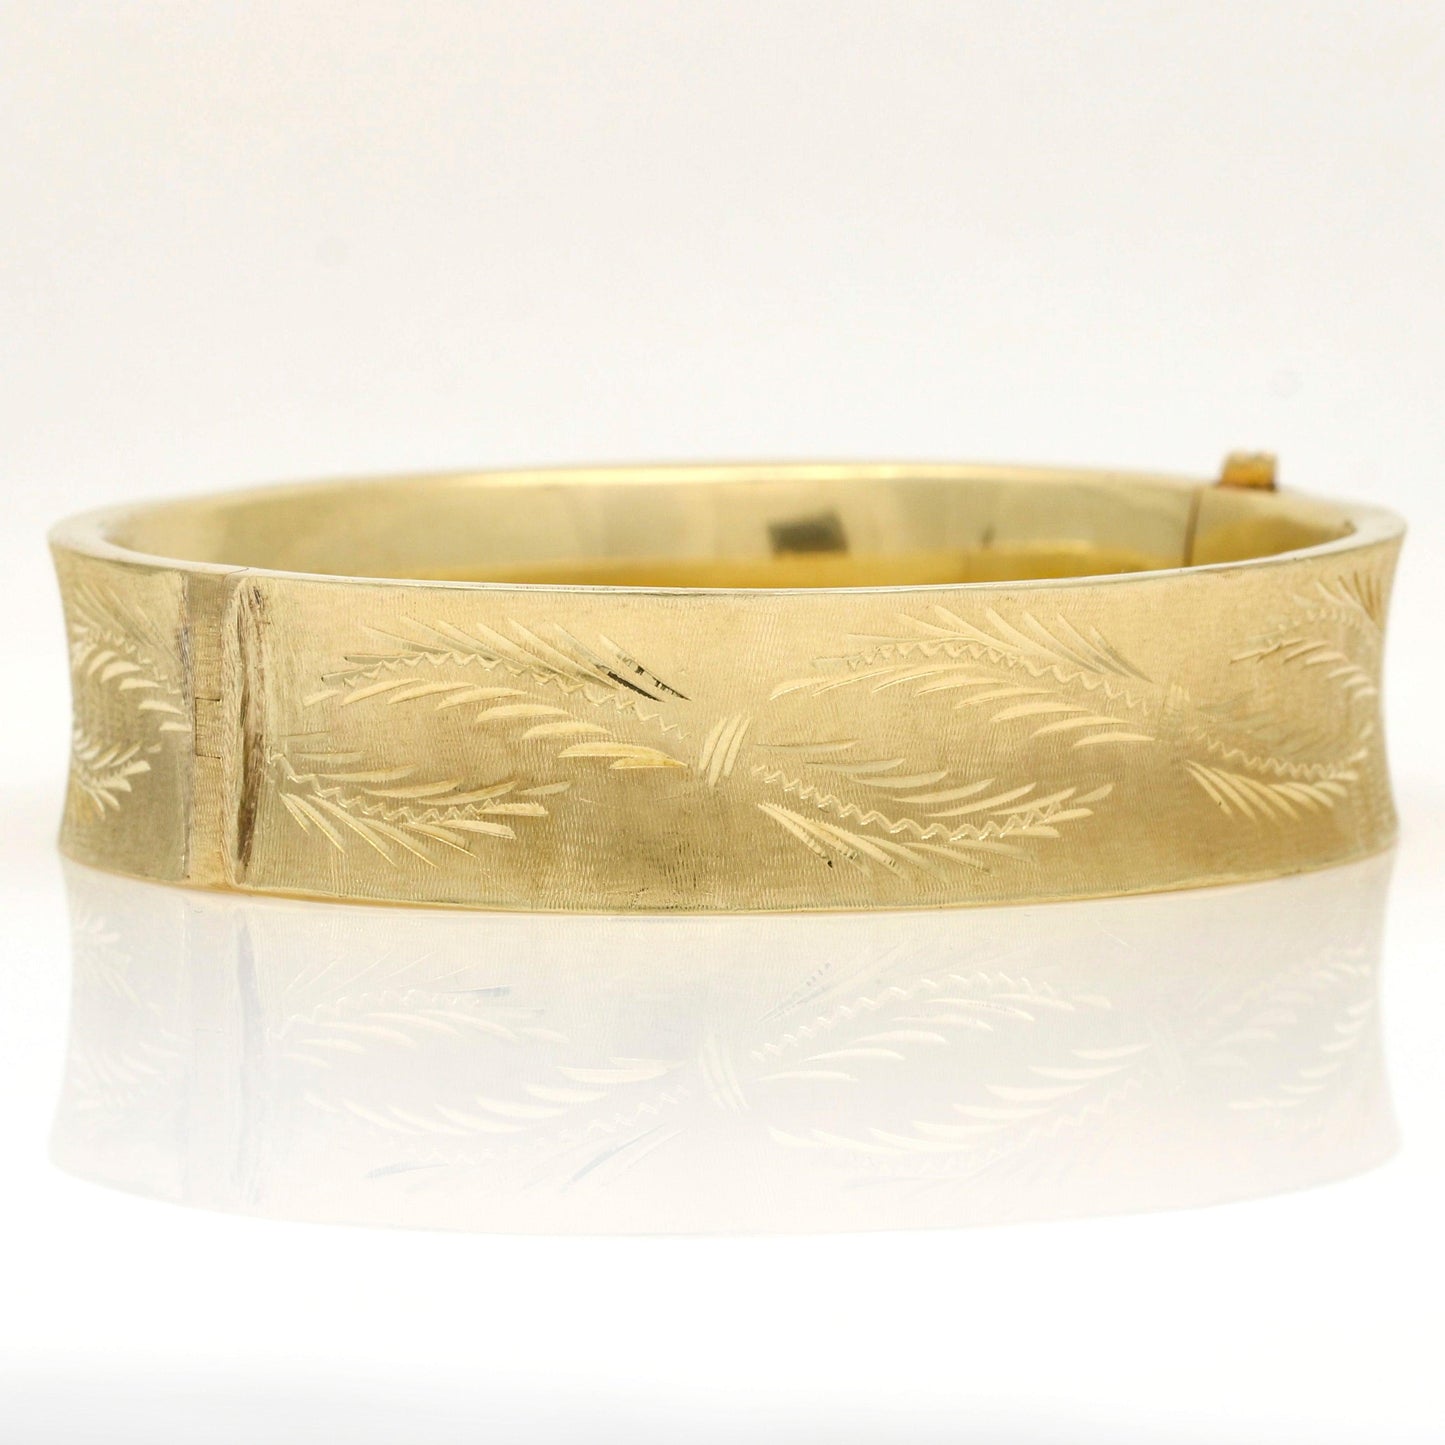 Women's Concave Hinged Bangle Bracelet in 14k Yellow Gold - 31 Jewels Inc.